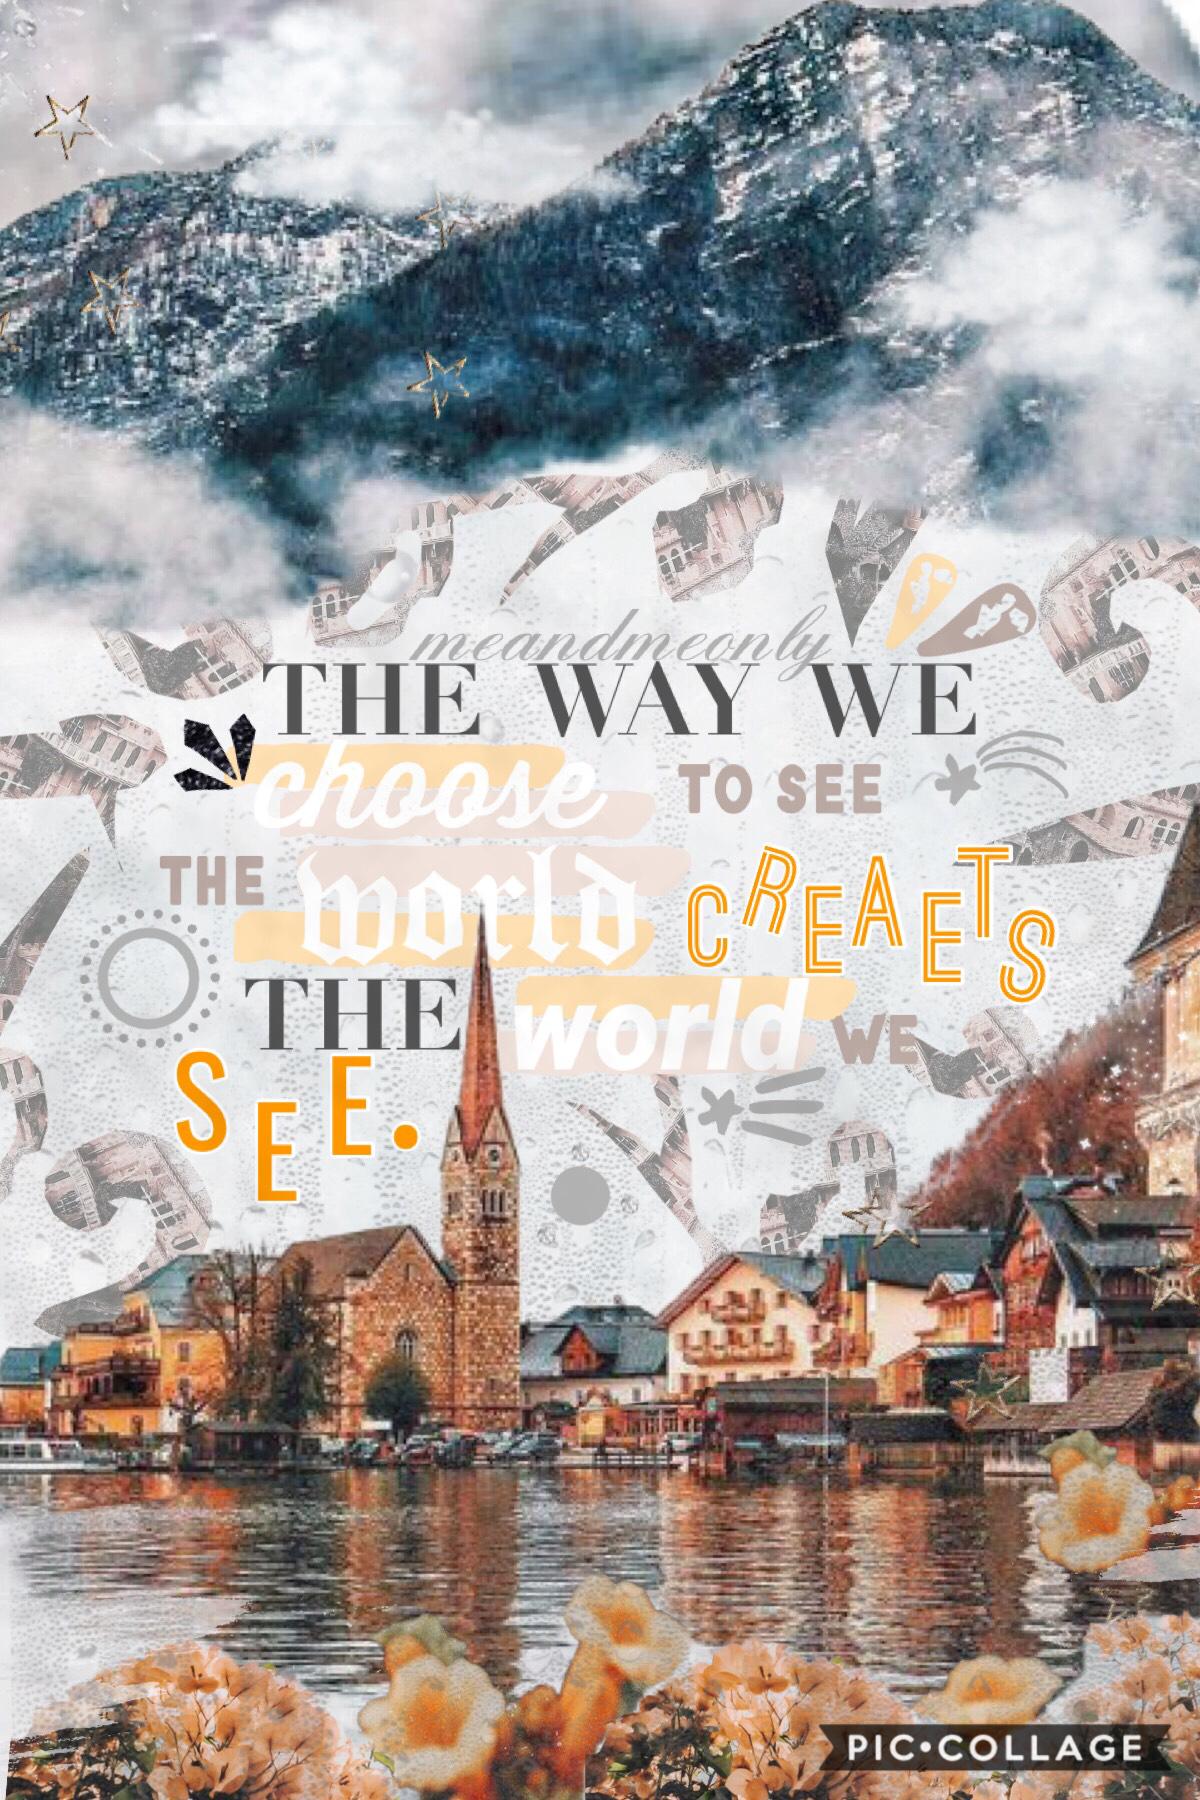 heyo! I tried out a complex bg and text collage! hope you like it. inspired by the amazing @dancingflowers and @dreamcatcher4ever! QOTD: should I do another complex text collage or go back to my other style? 🙂🌸💓🌿